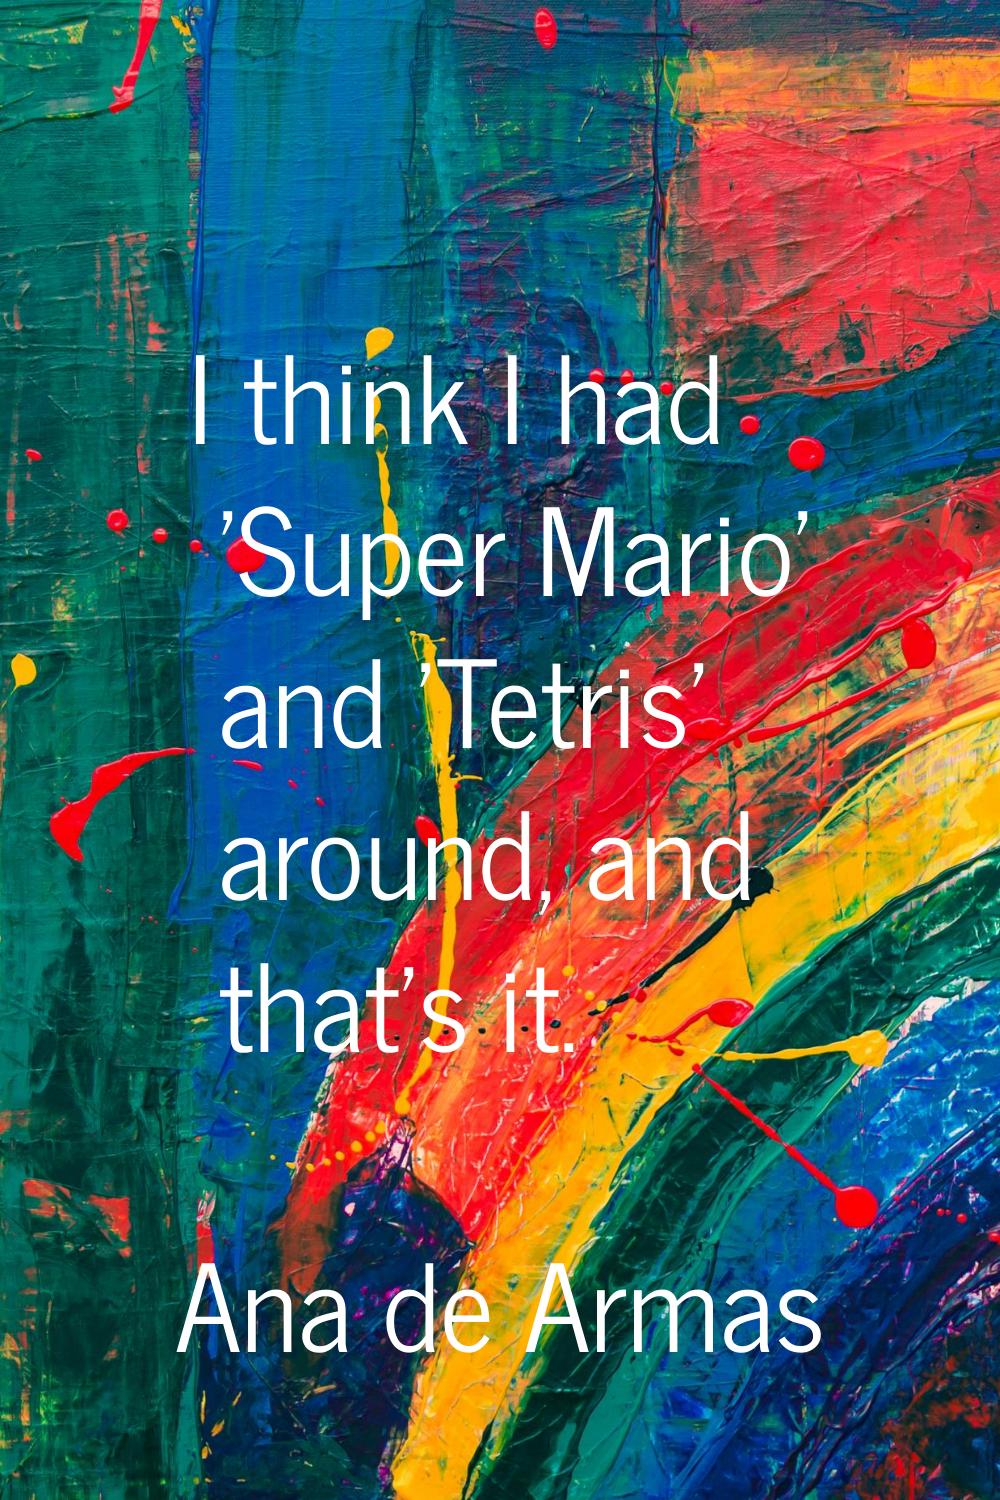 I think I had 'Super Mario' and 'Tetris' around, and that's it.